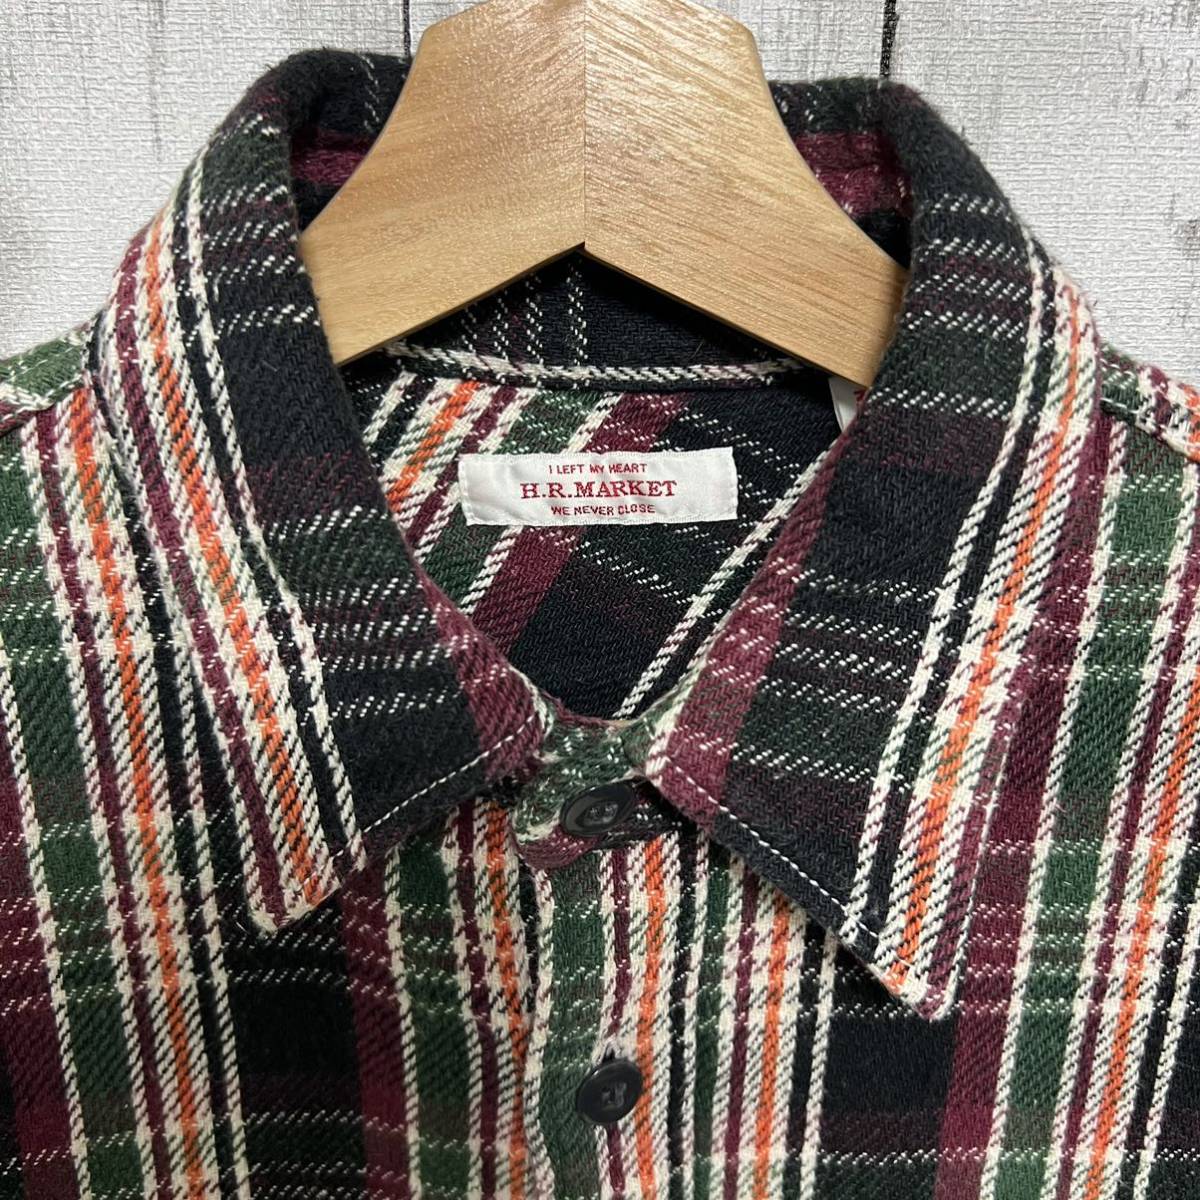 H.R MARKET flannel shirt! made in Japan!